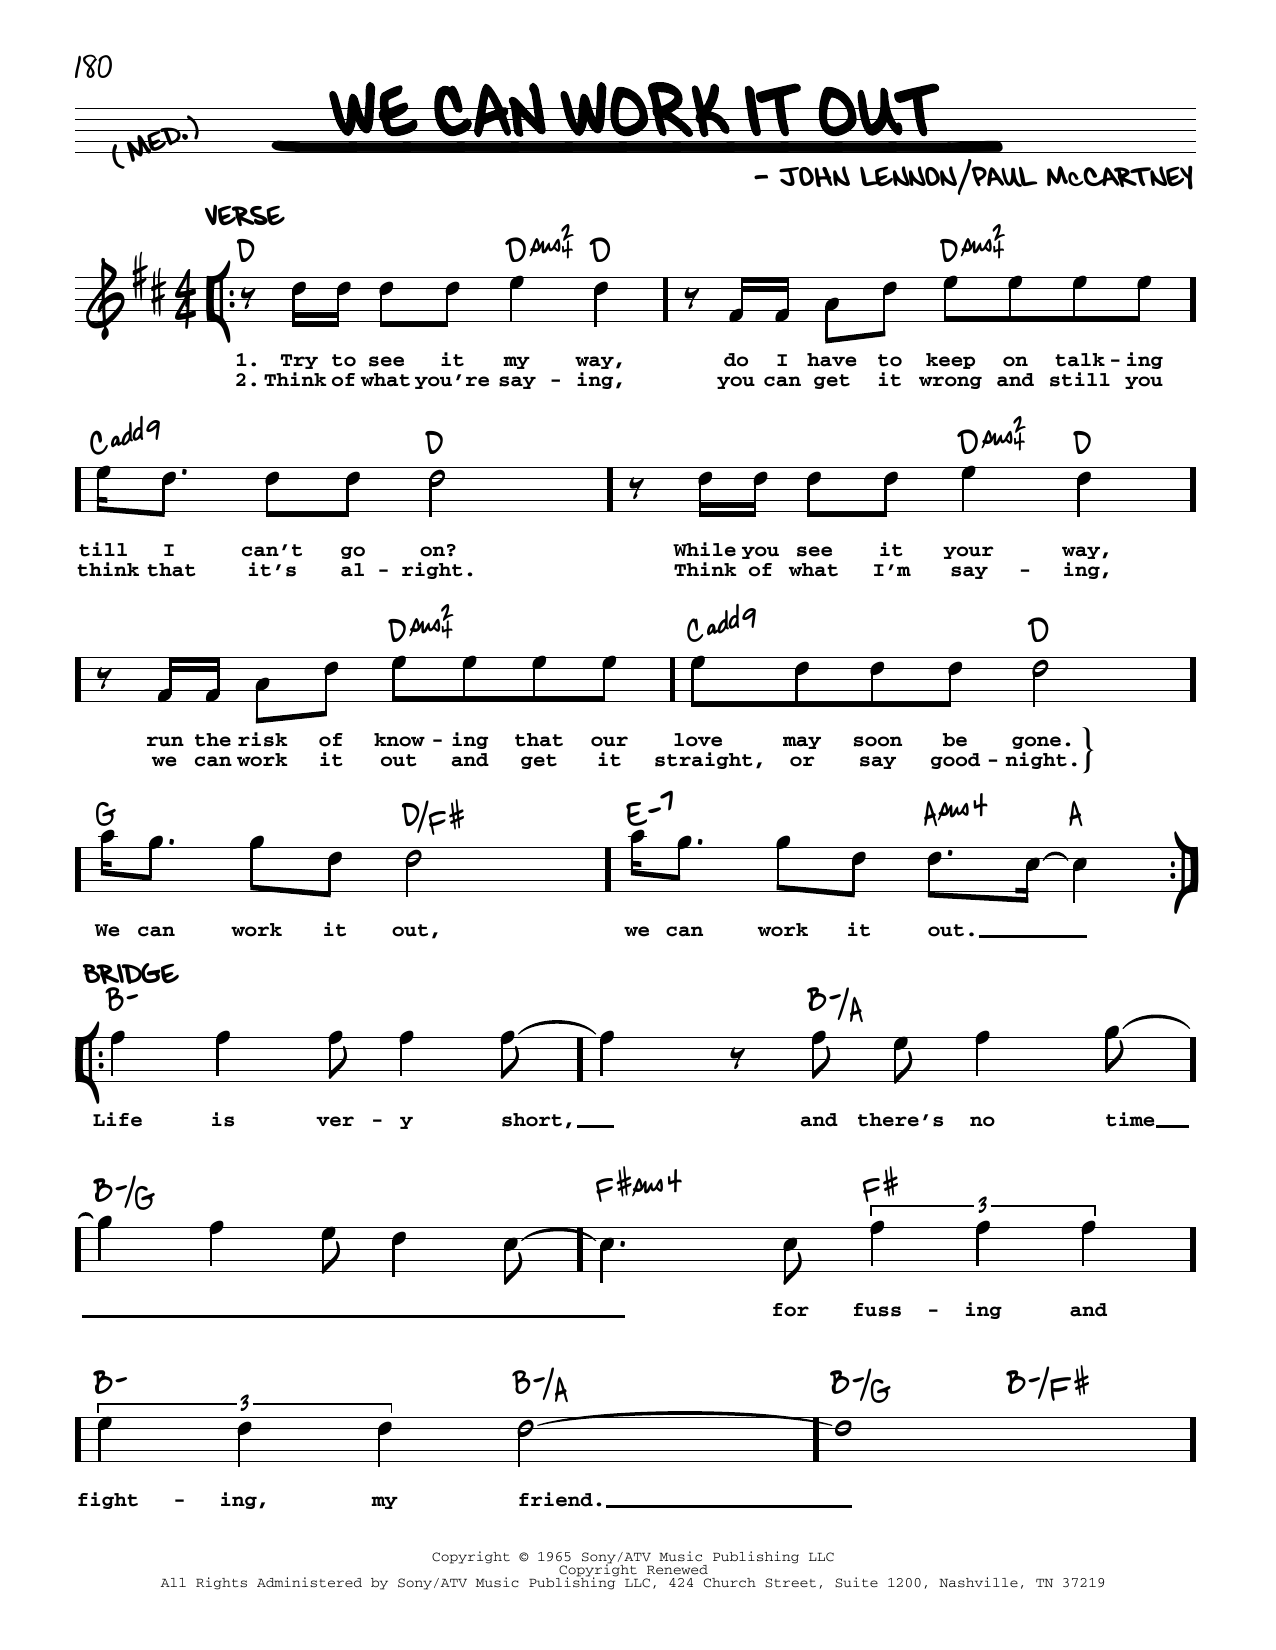 Download The Beatles We Can Work It Out [Jazz version] Sheet Music